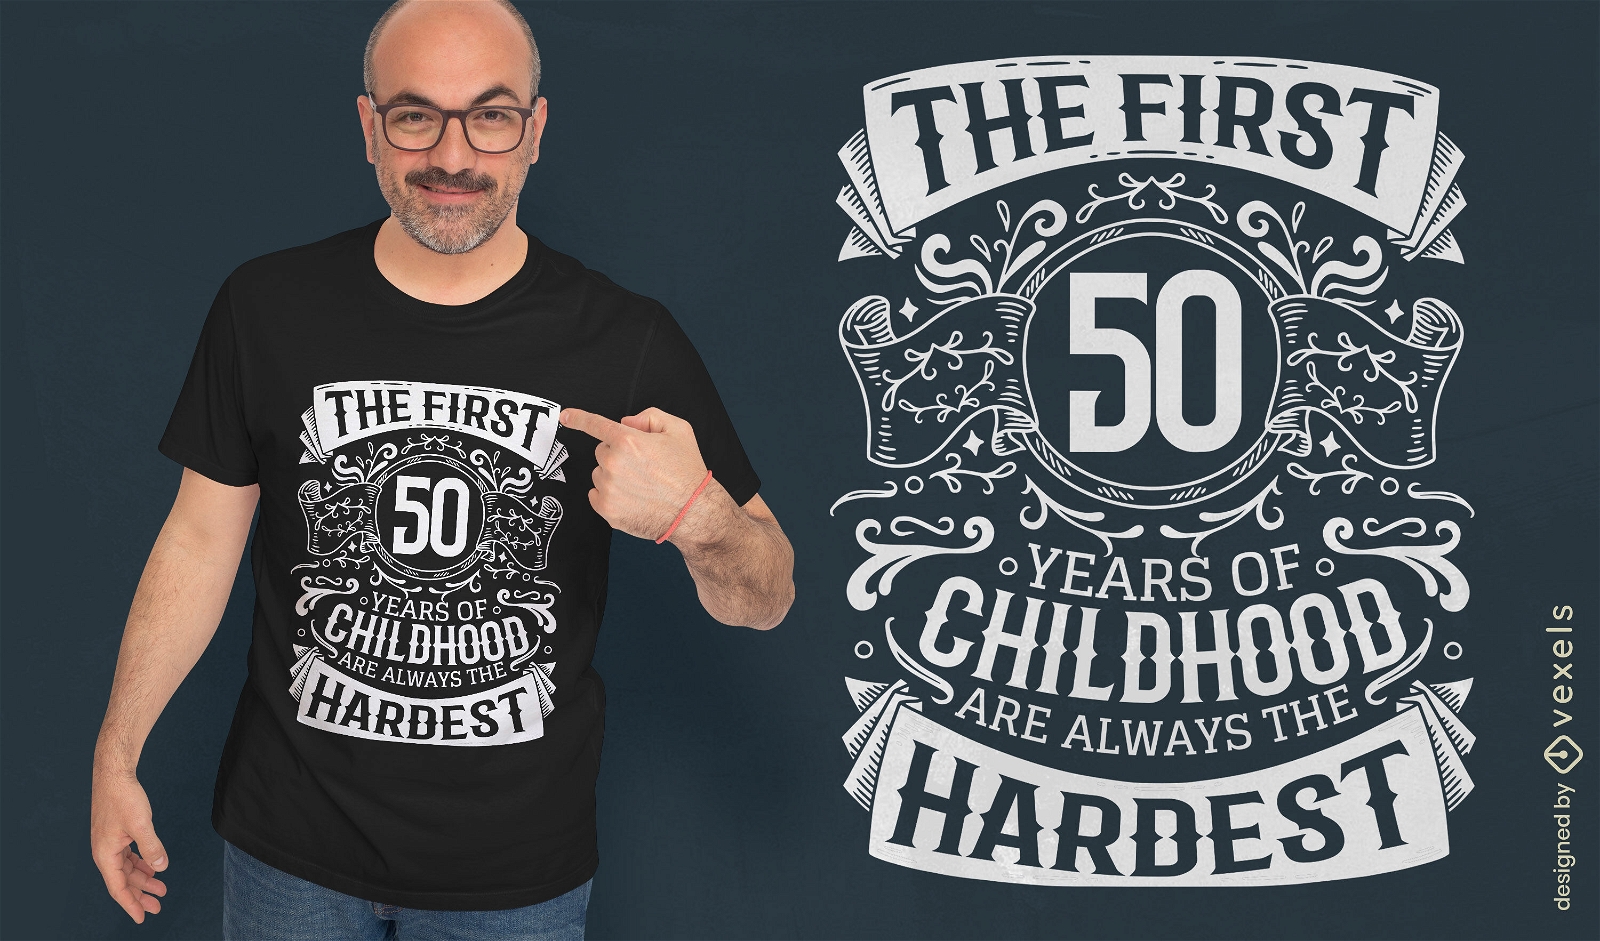 The first 50 years of childhood t-shirt design